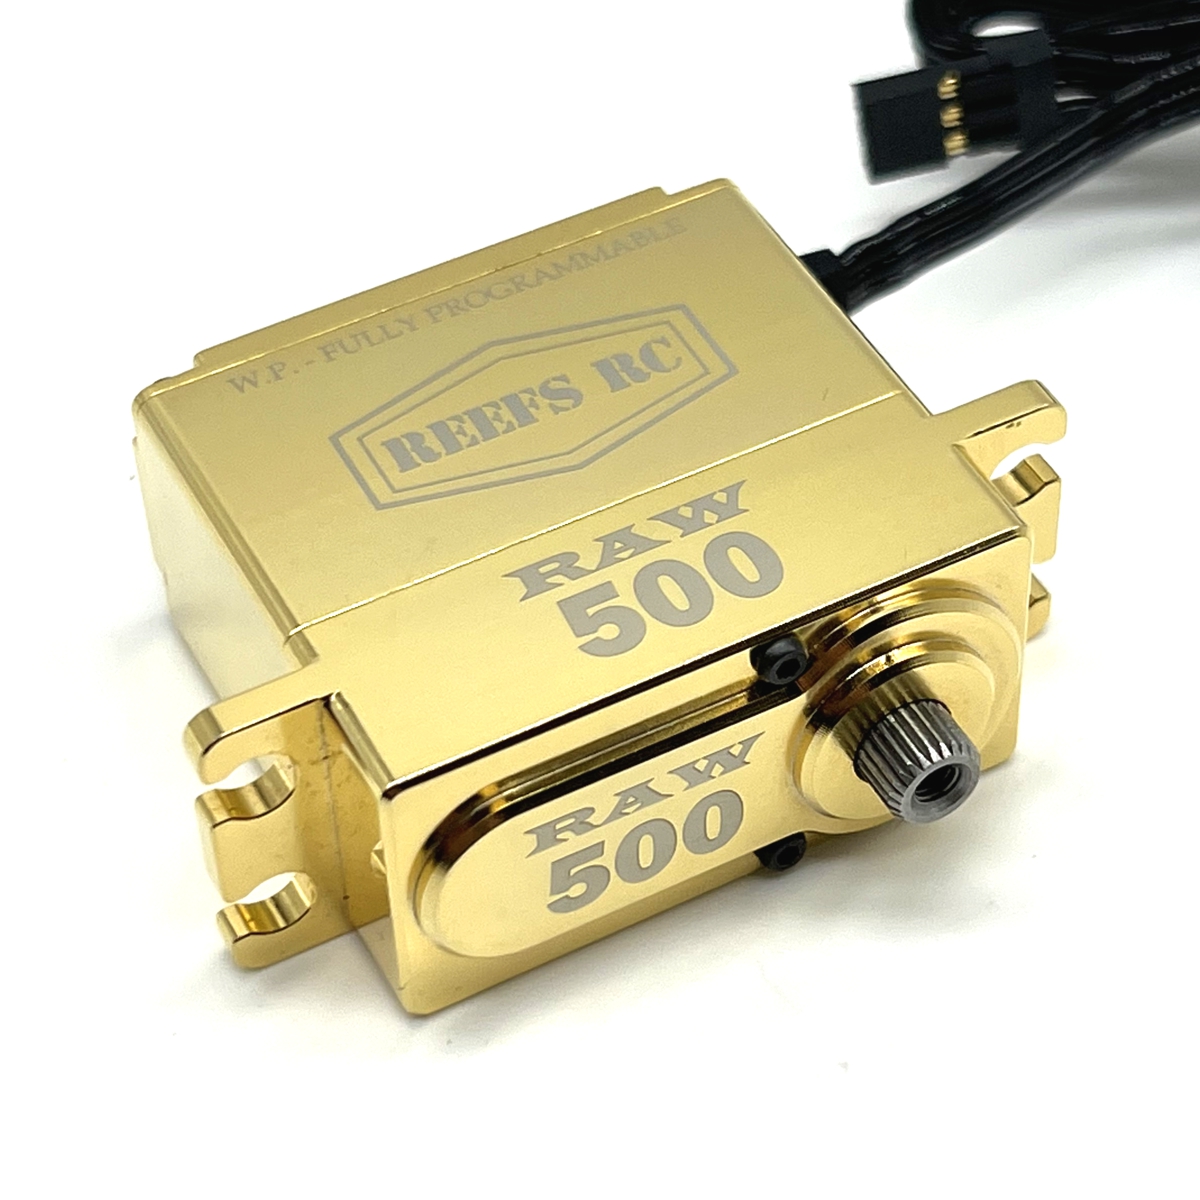 Picture of Reefs RC SEHREEFS159 RAW500 Brass Edition Programmable Waterproof Brushless Servo